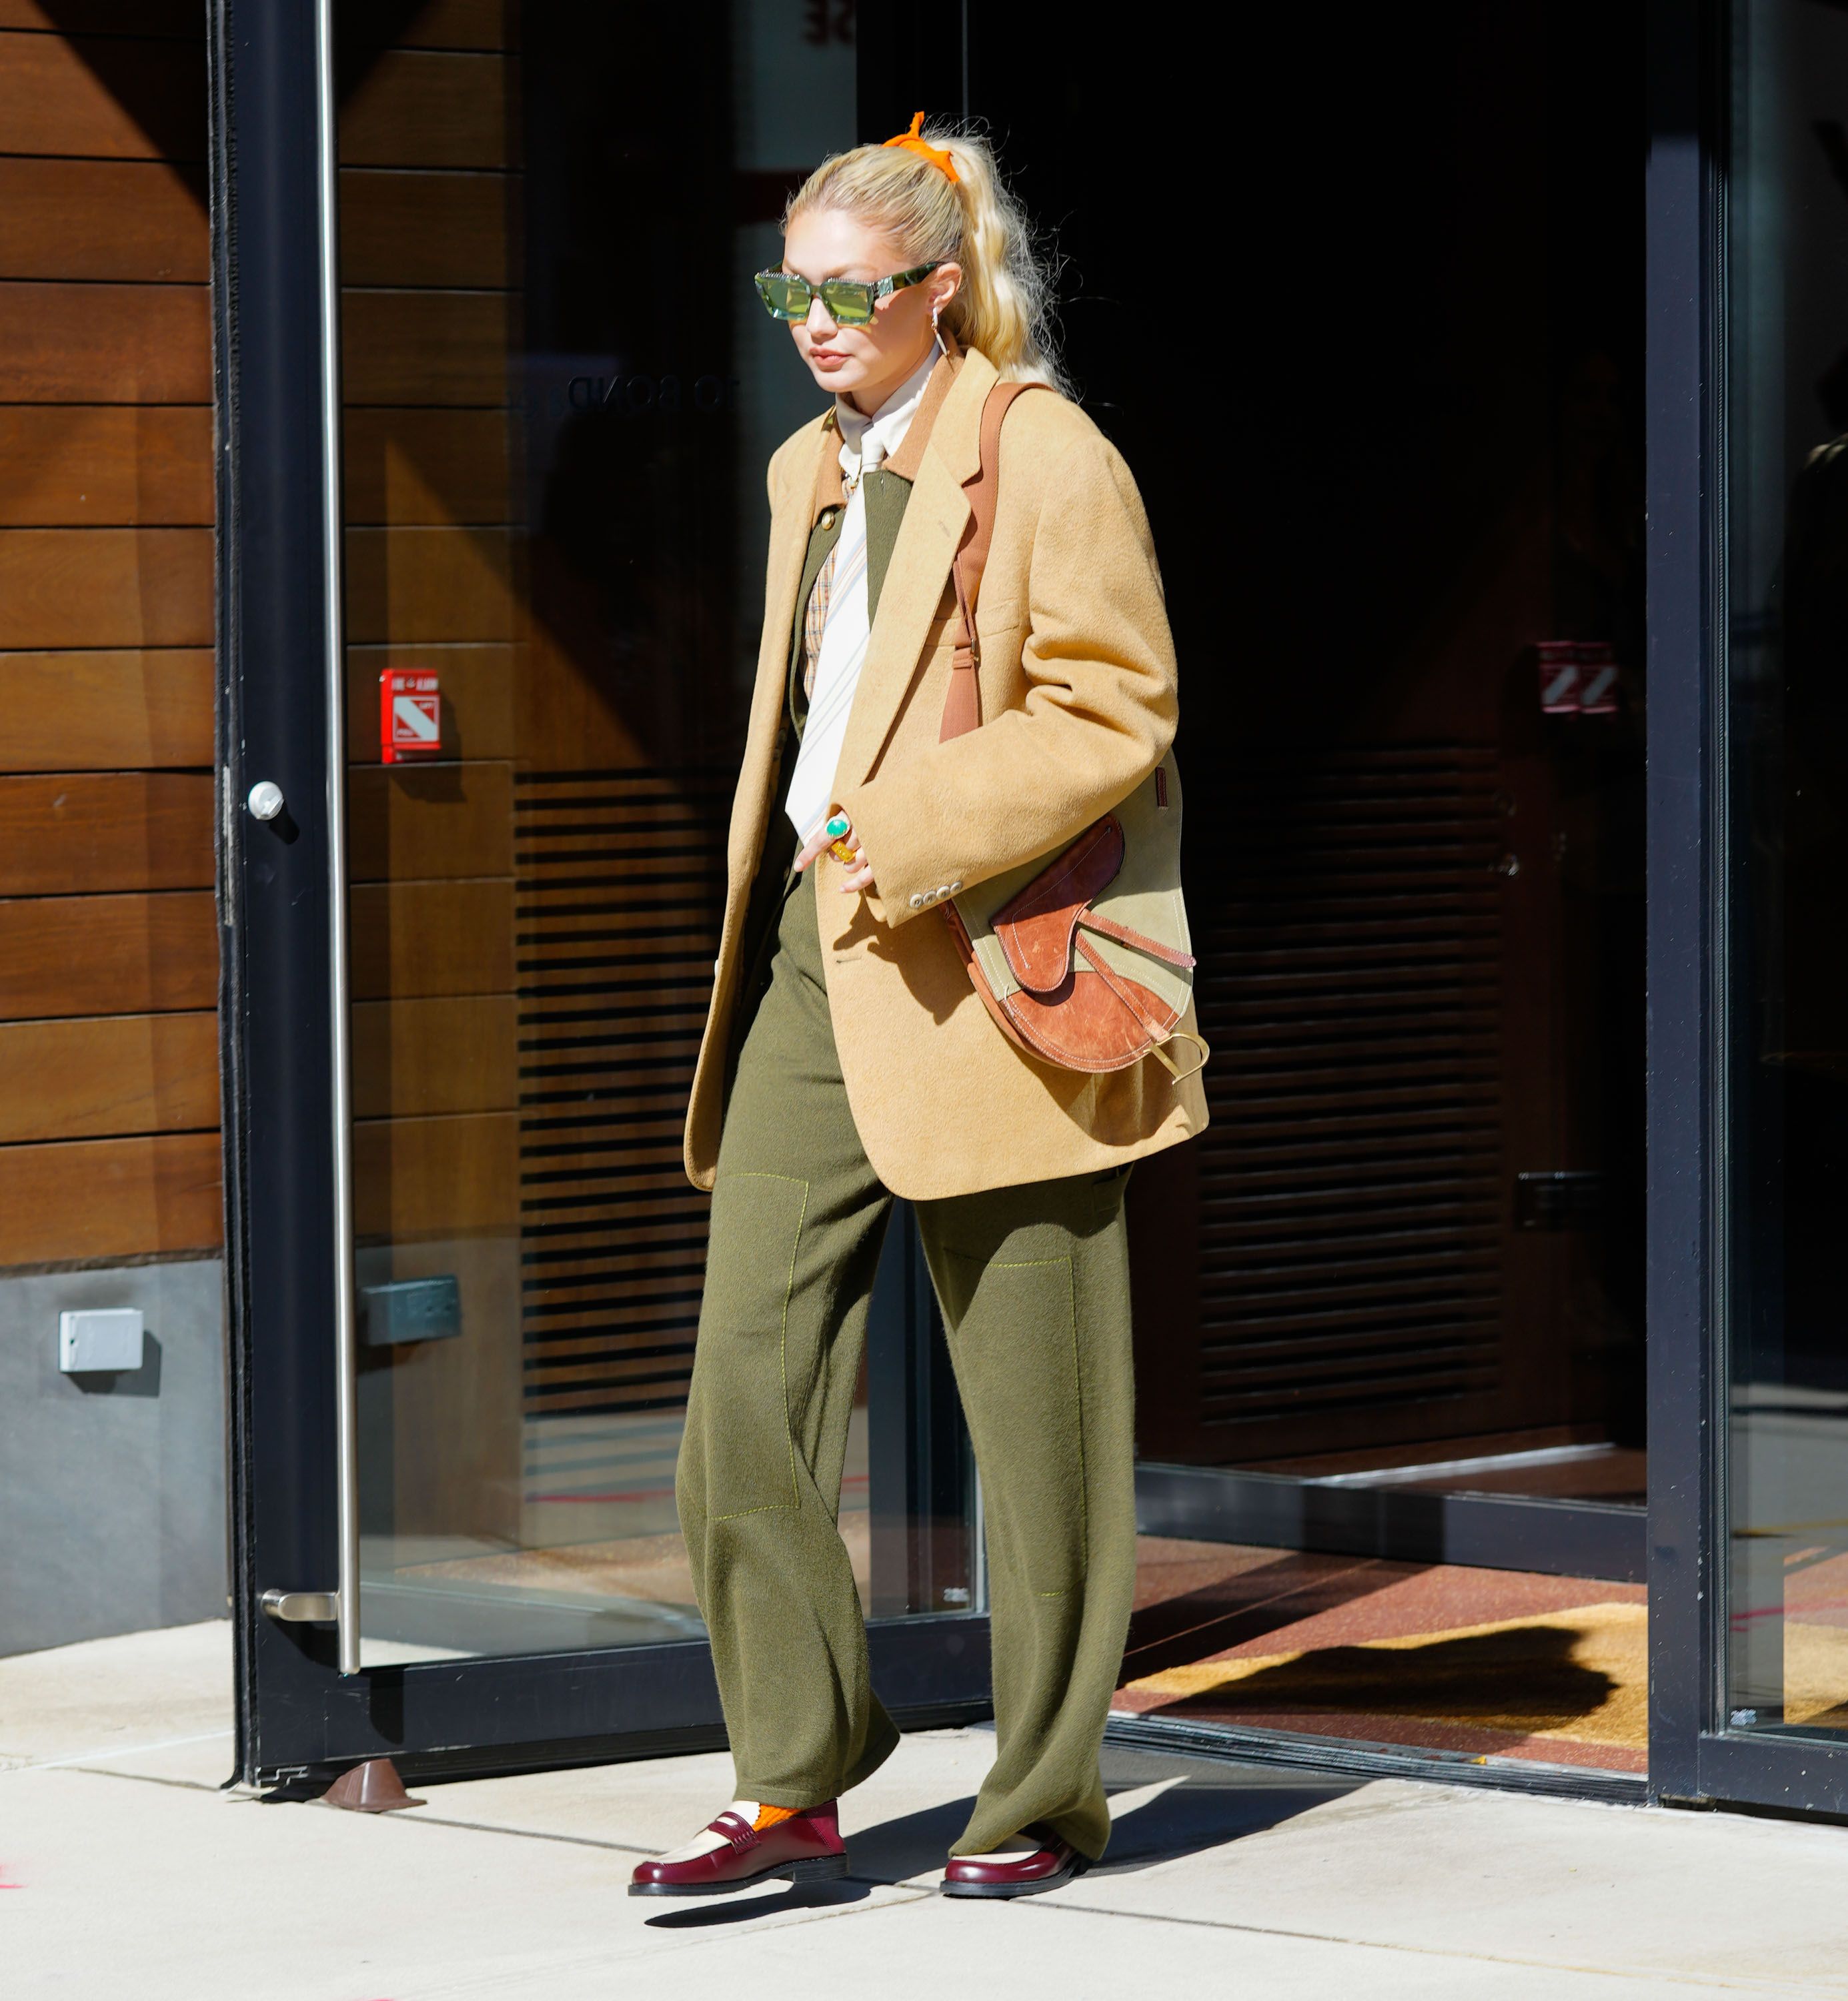 See Gigi Hadid's Costal Grandmother Style in a Beige and Olive Look